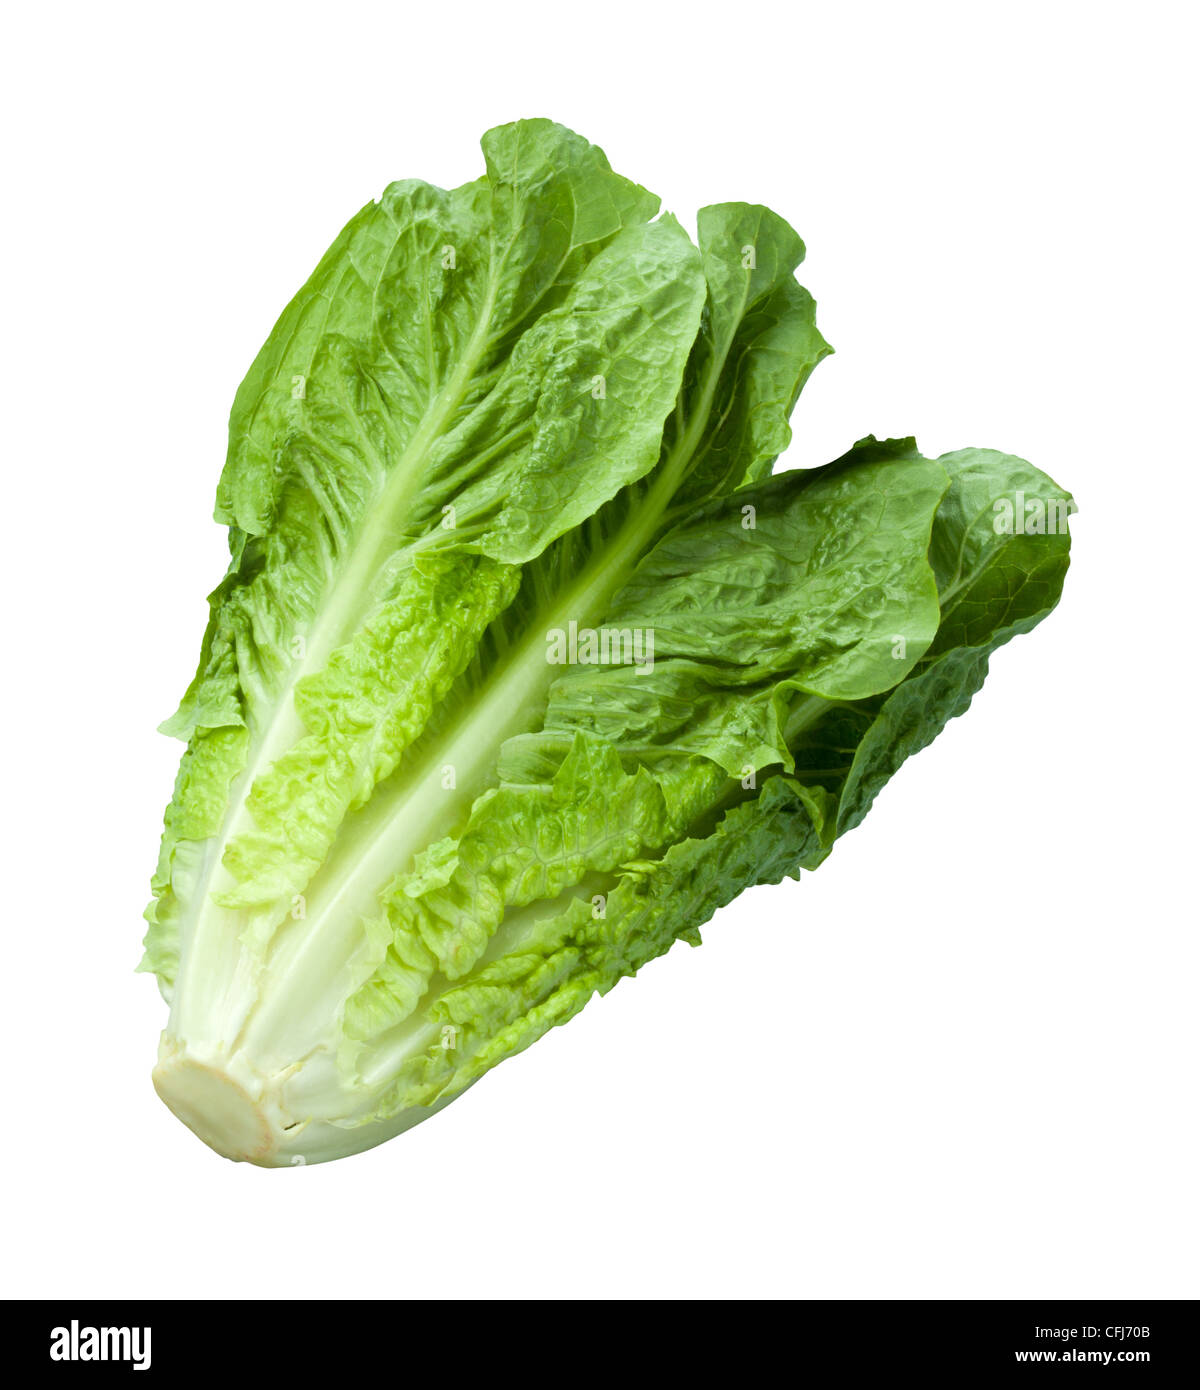 Laitue romaine isolated on white Banque D'Images